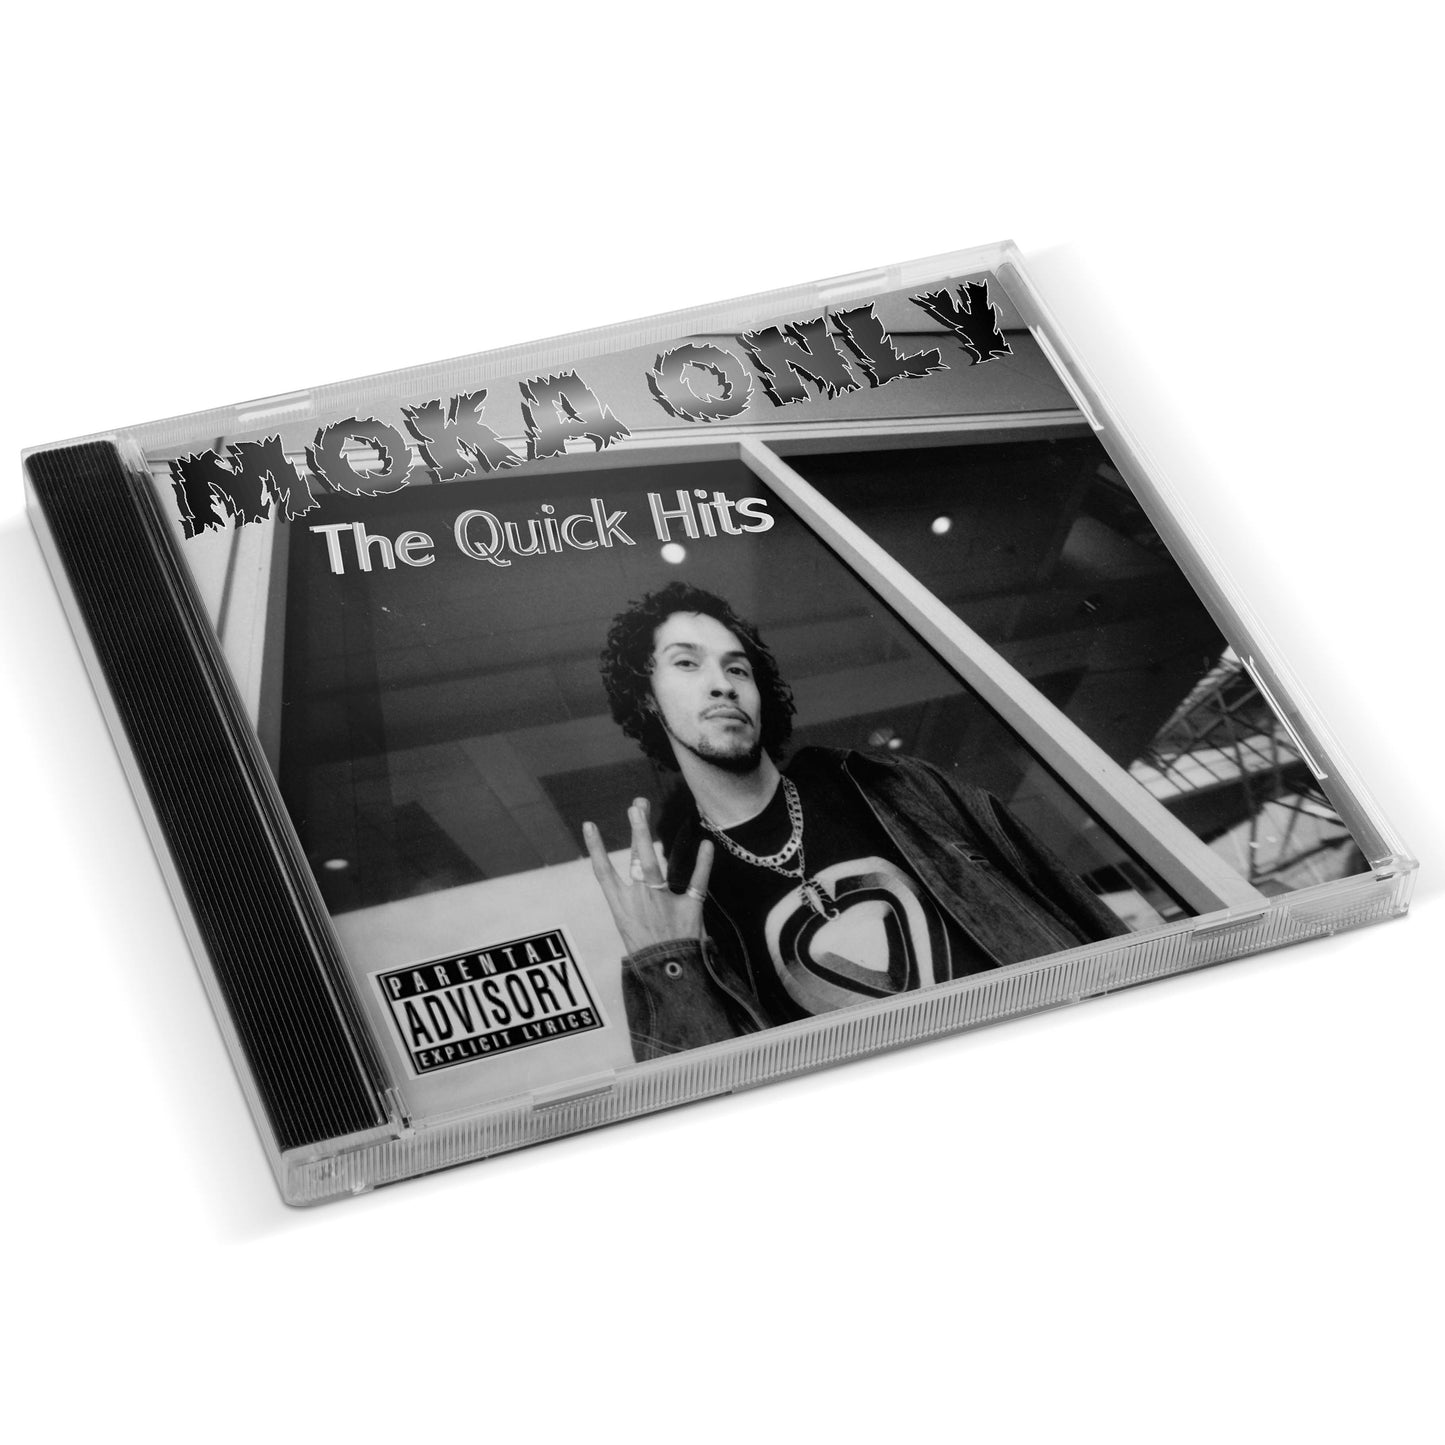 Moka Only - The Quick Hits CD